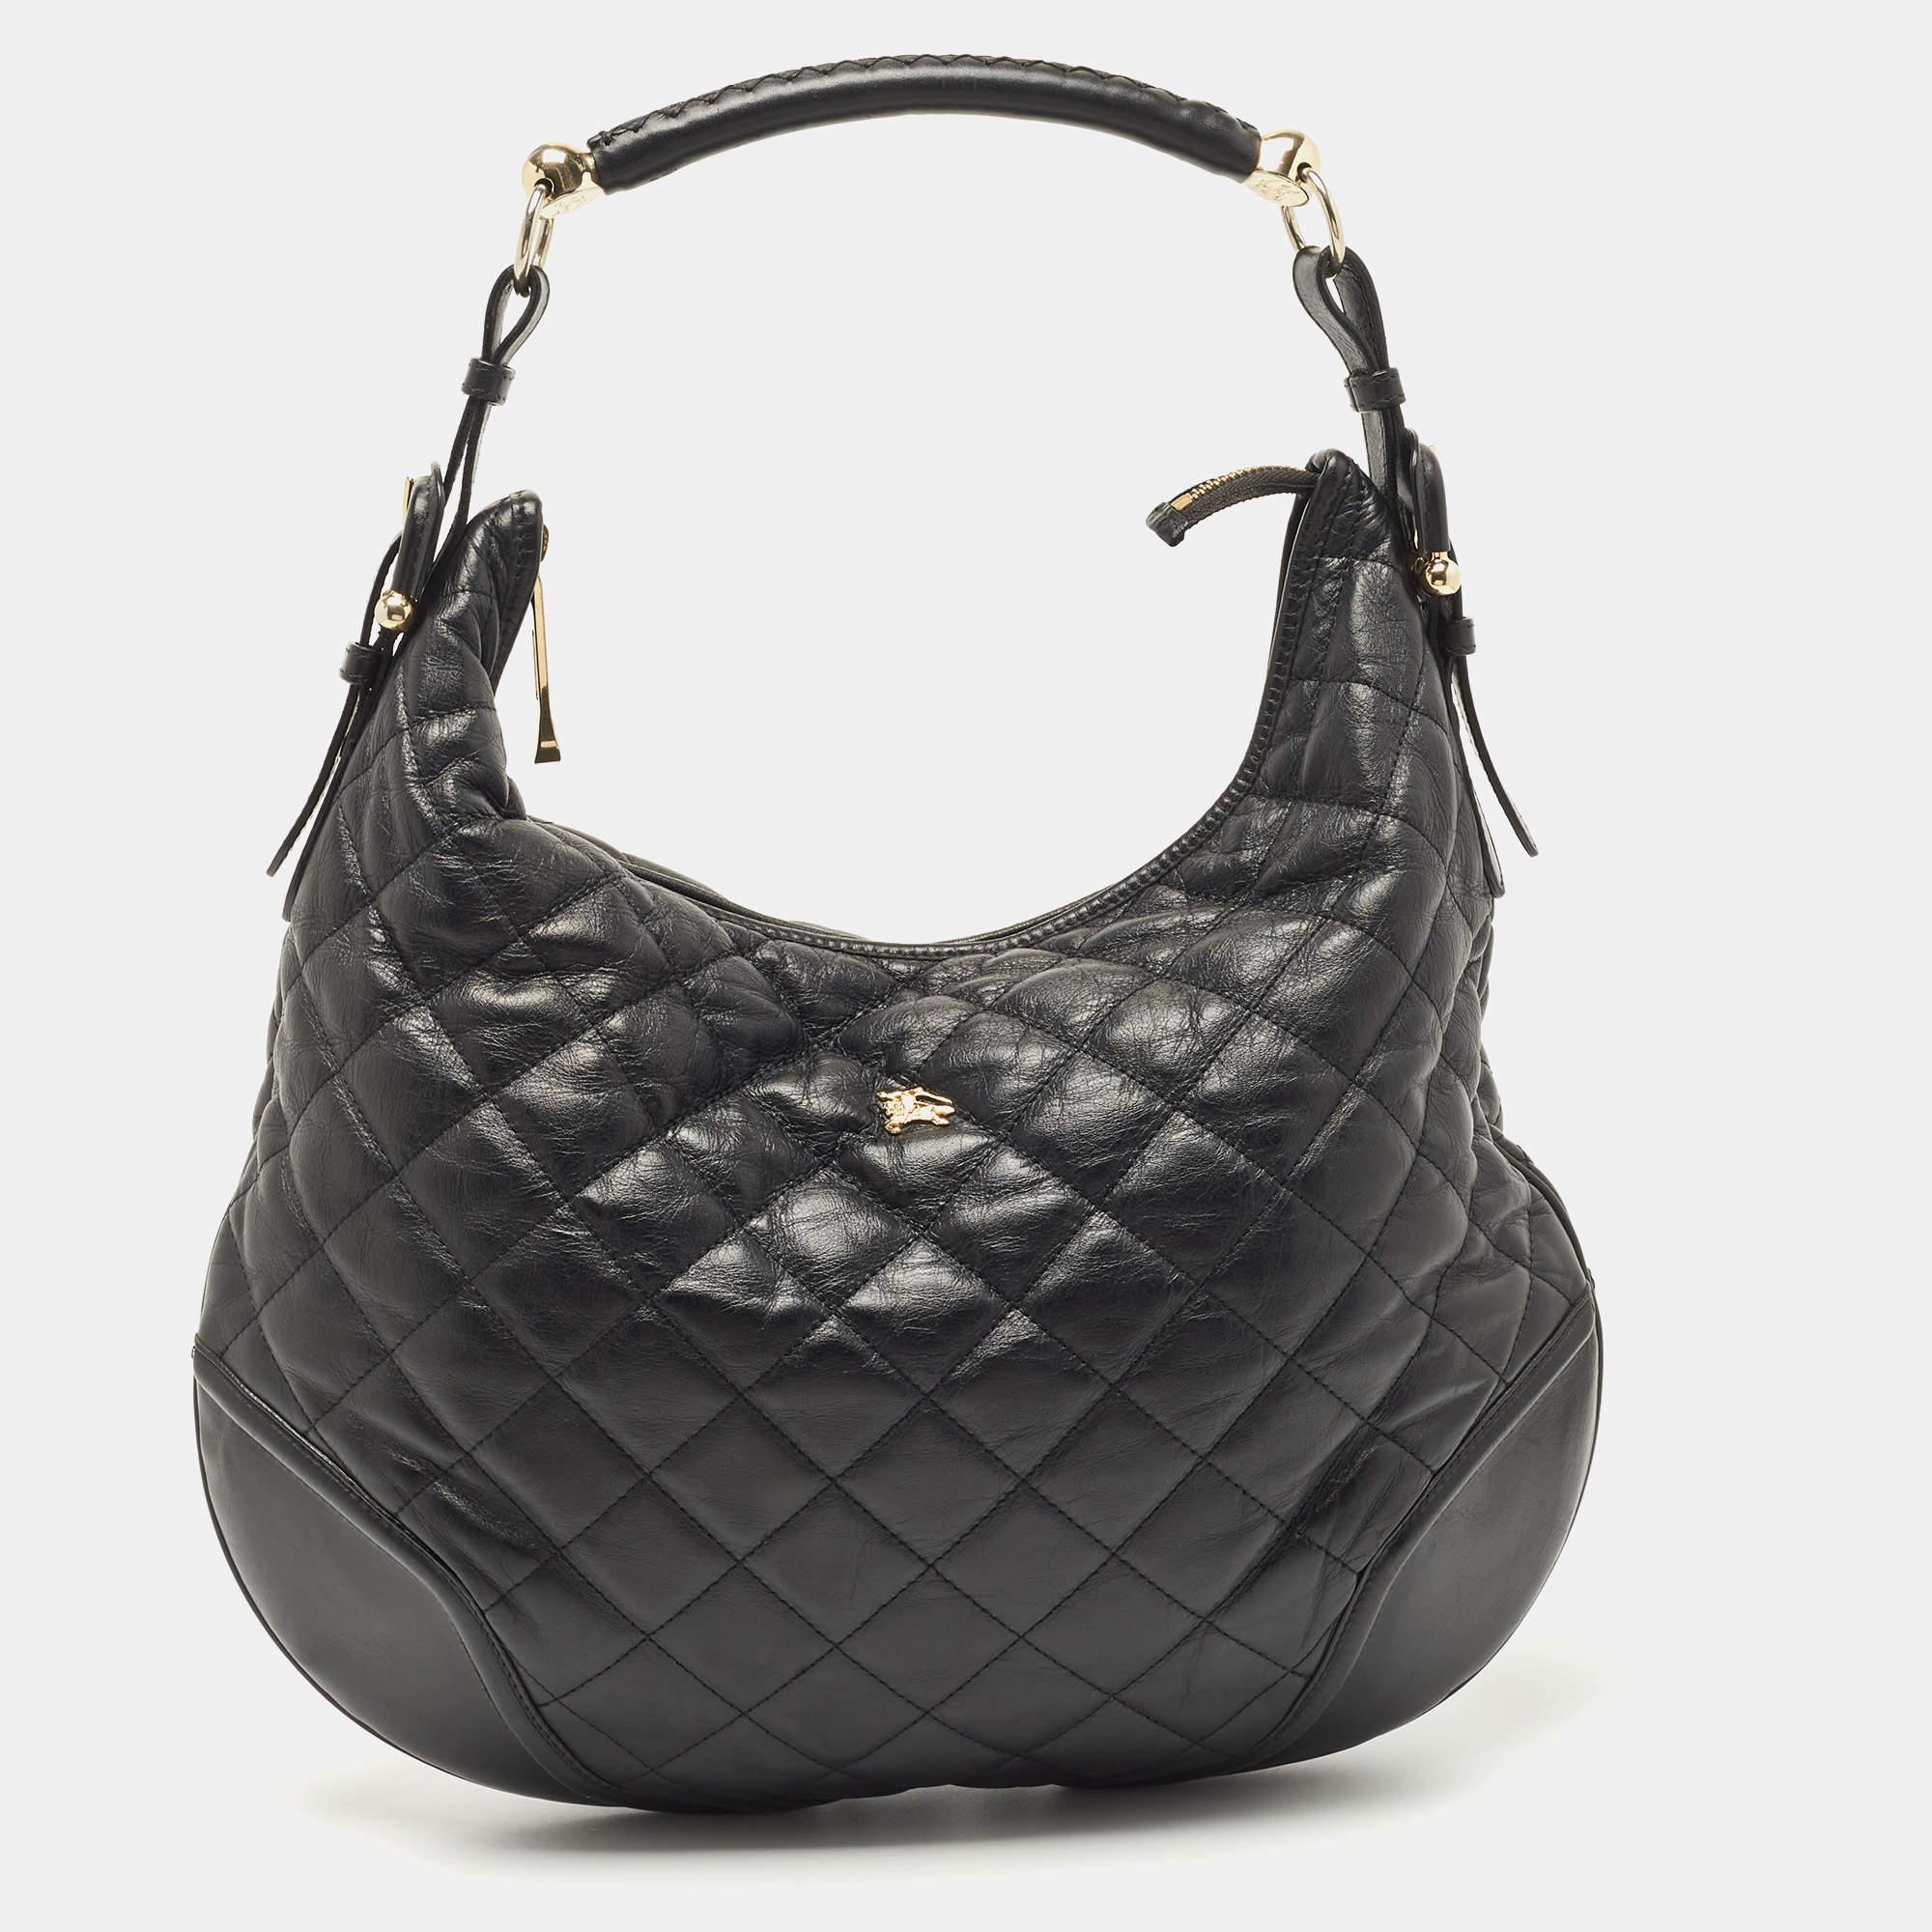 Burberry Black Quilted Leather Hoxton Hobo 8